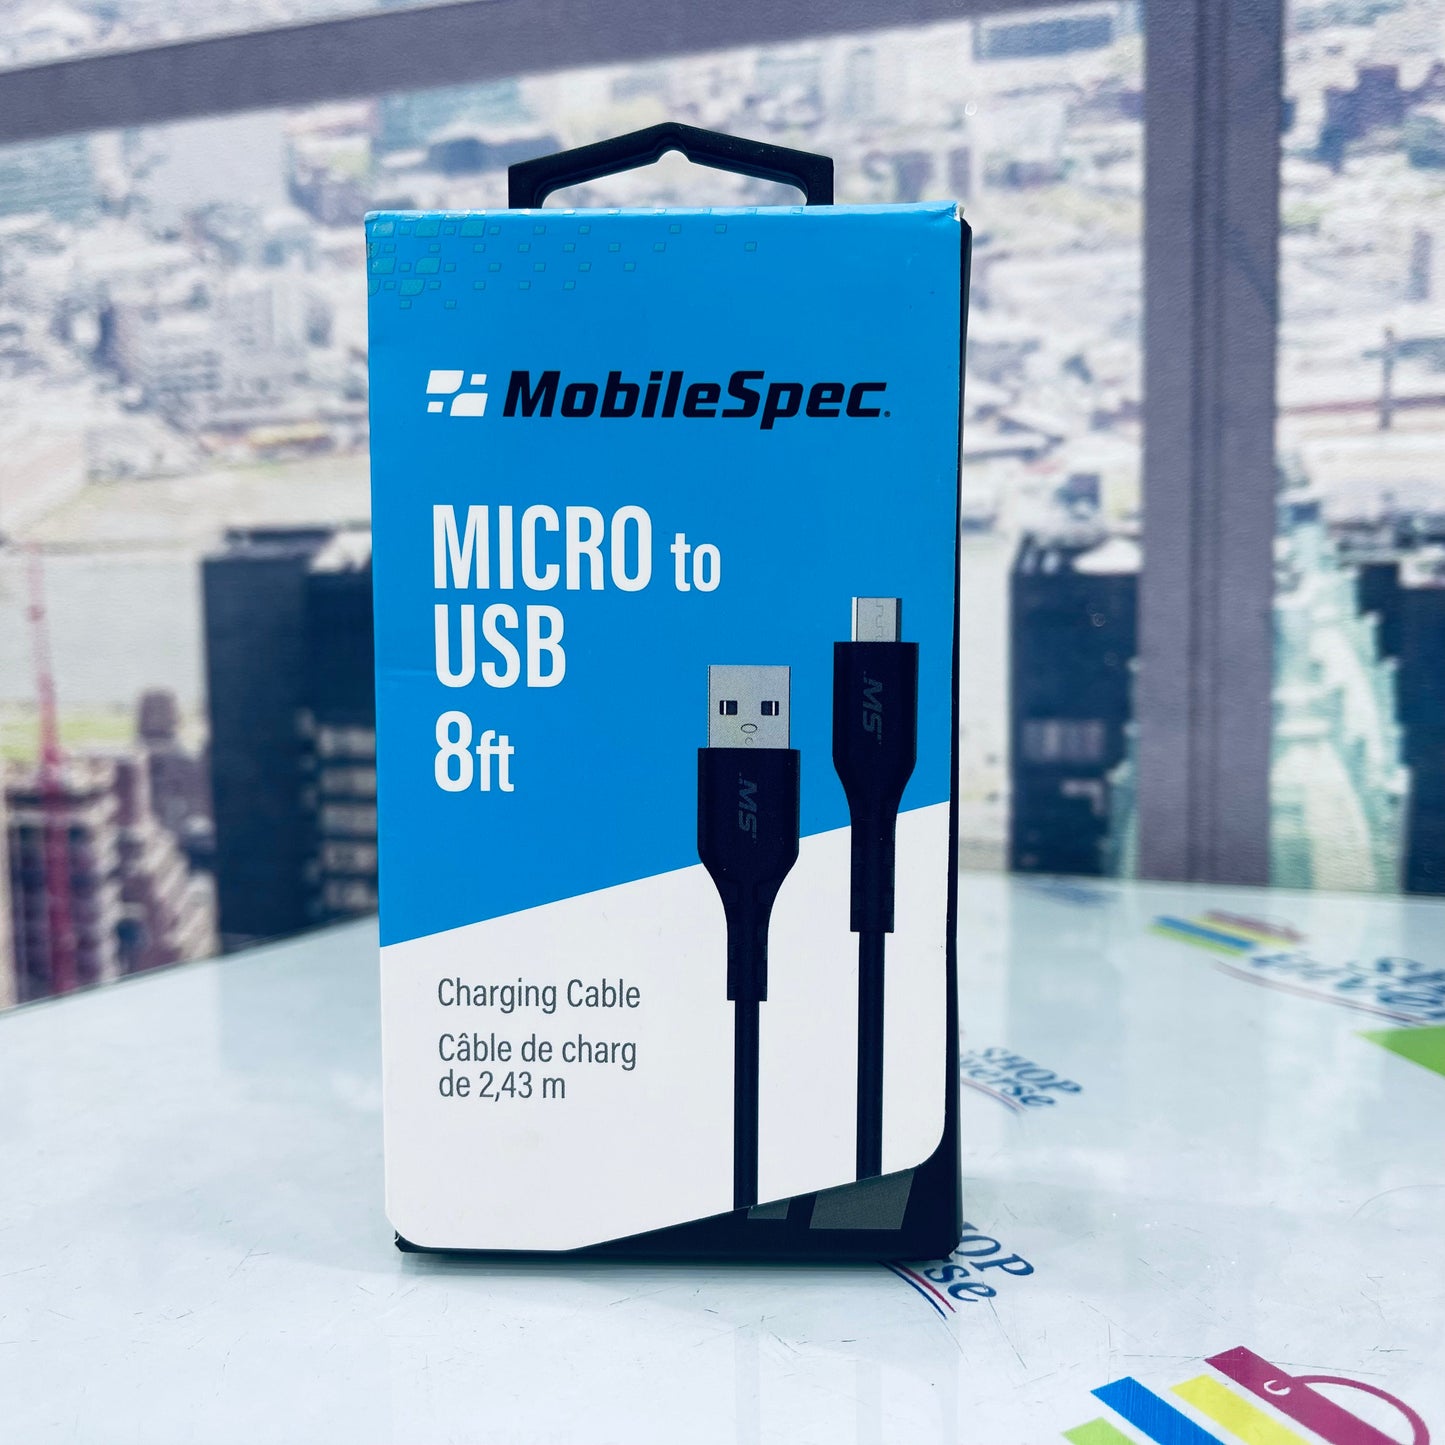 MobileSpec Micro to USB Charging Cable 8ft SHOPINVERSE